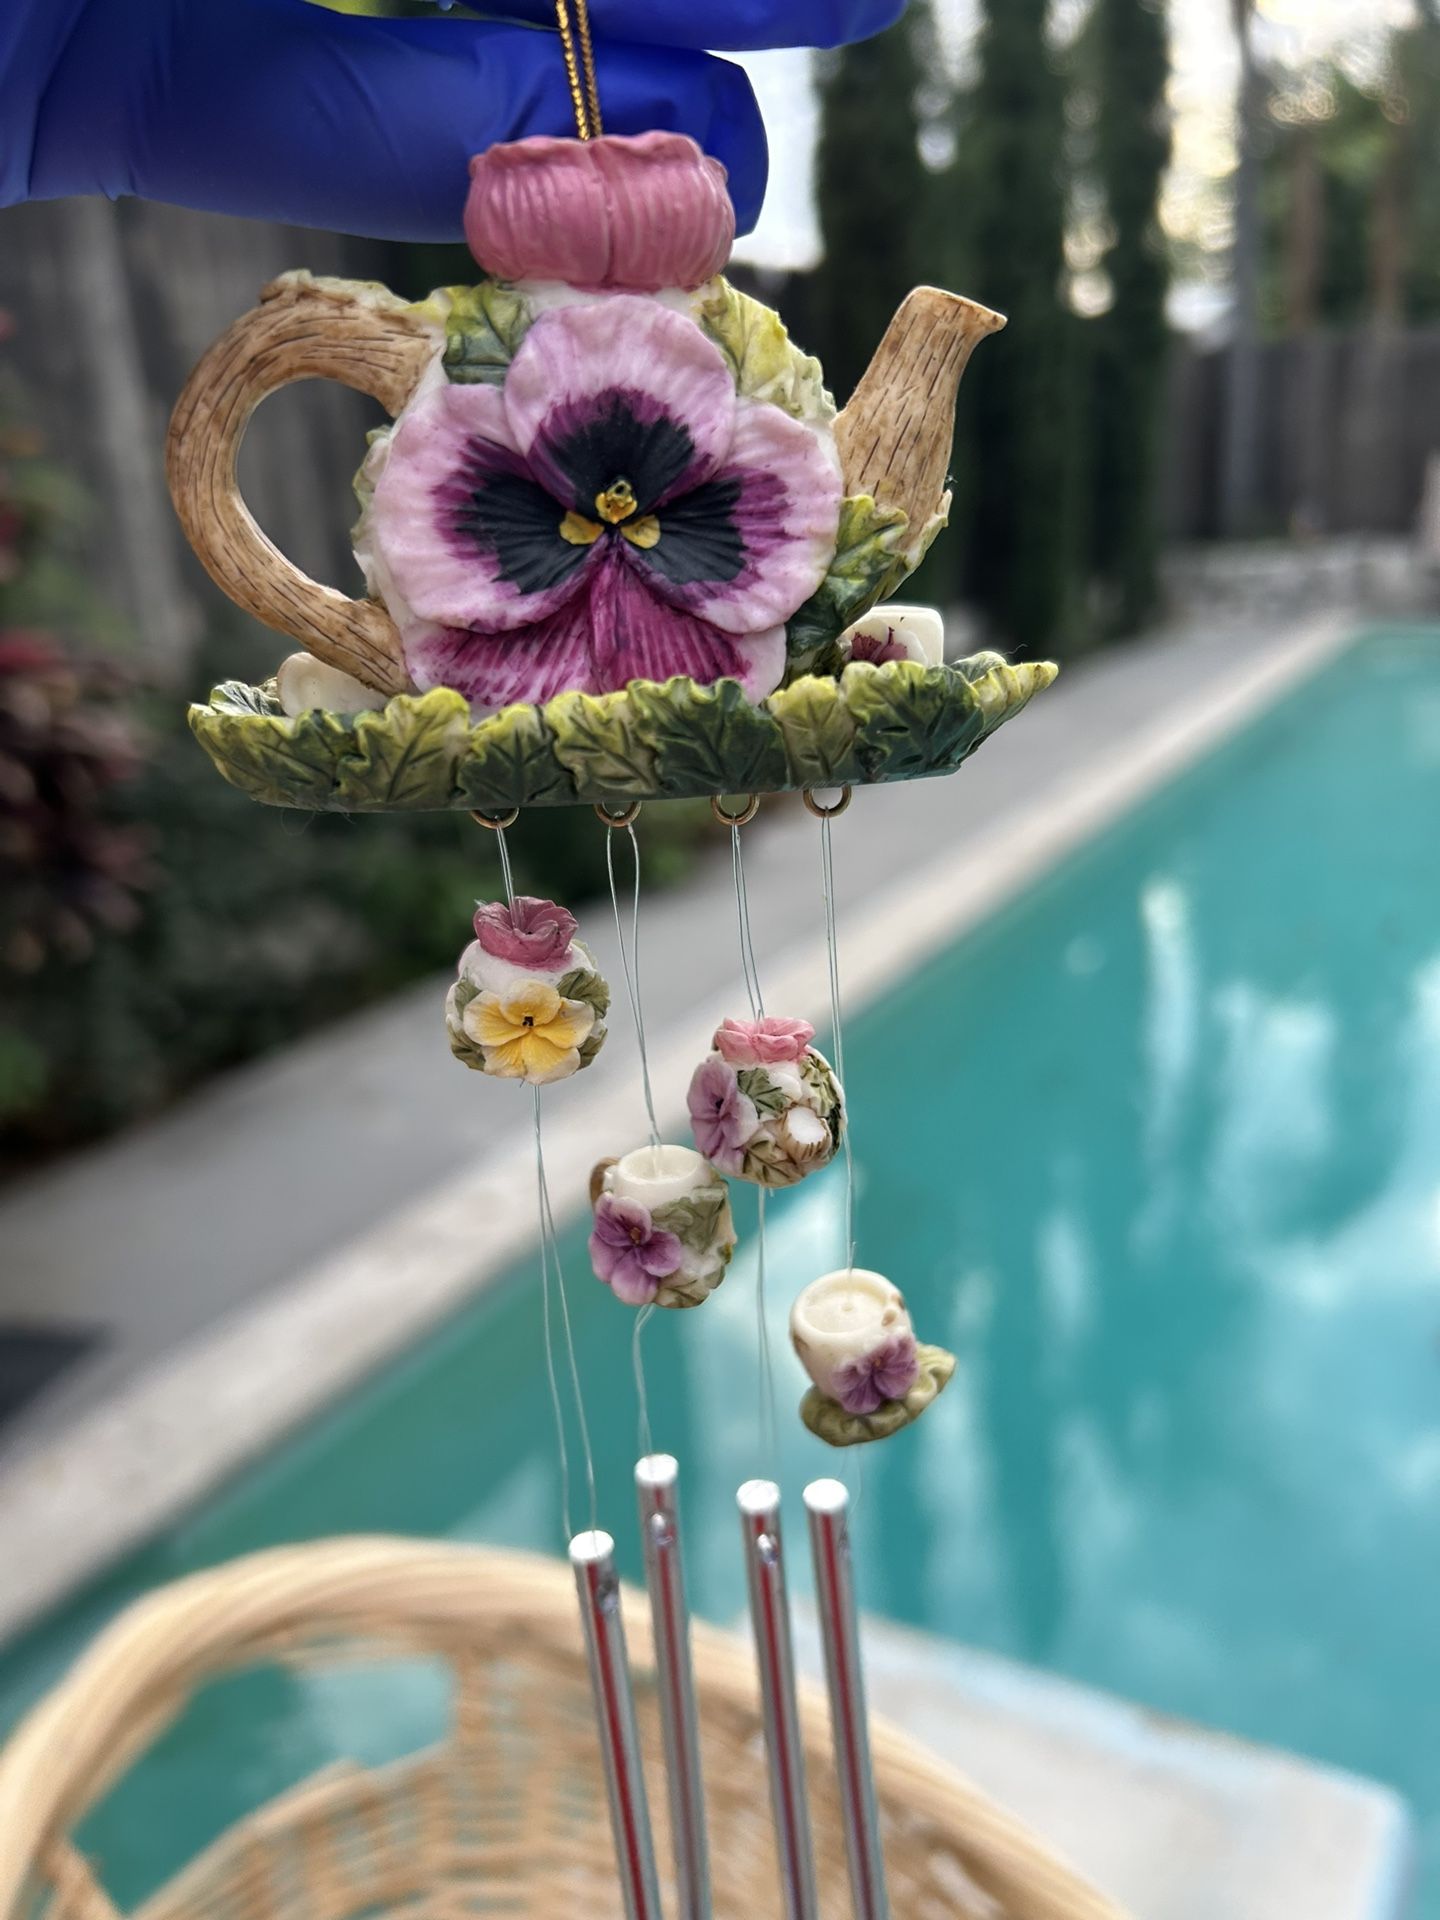 Small wind chime